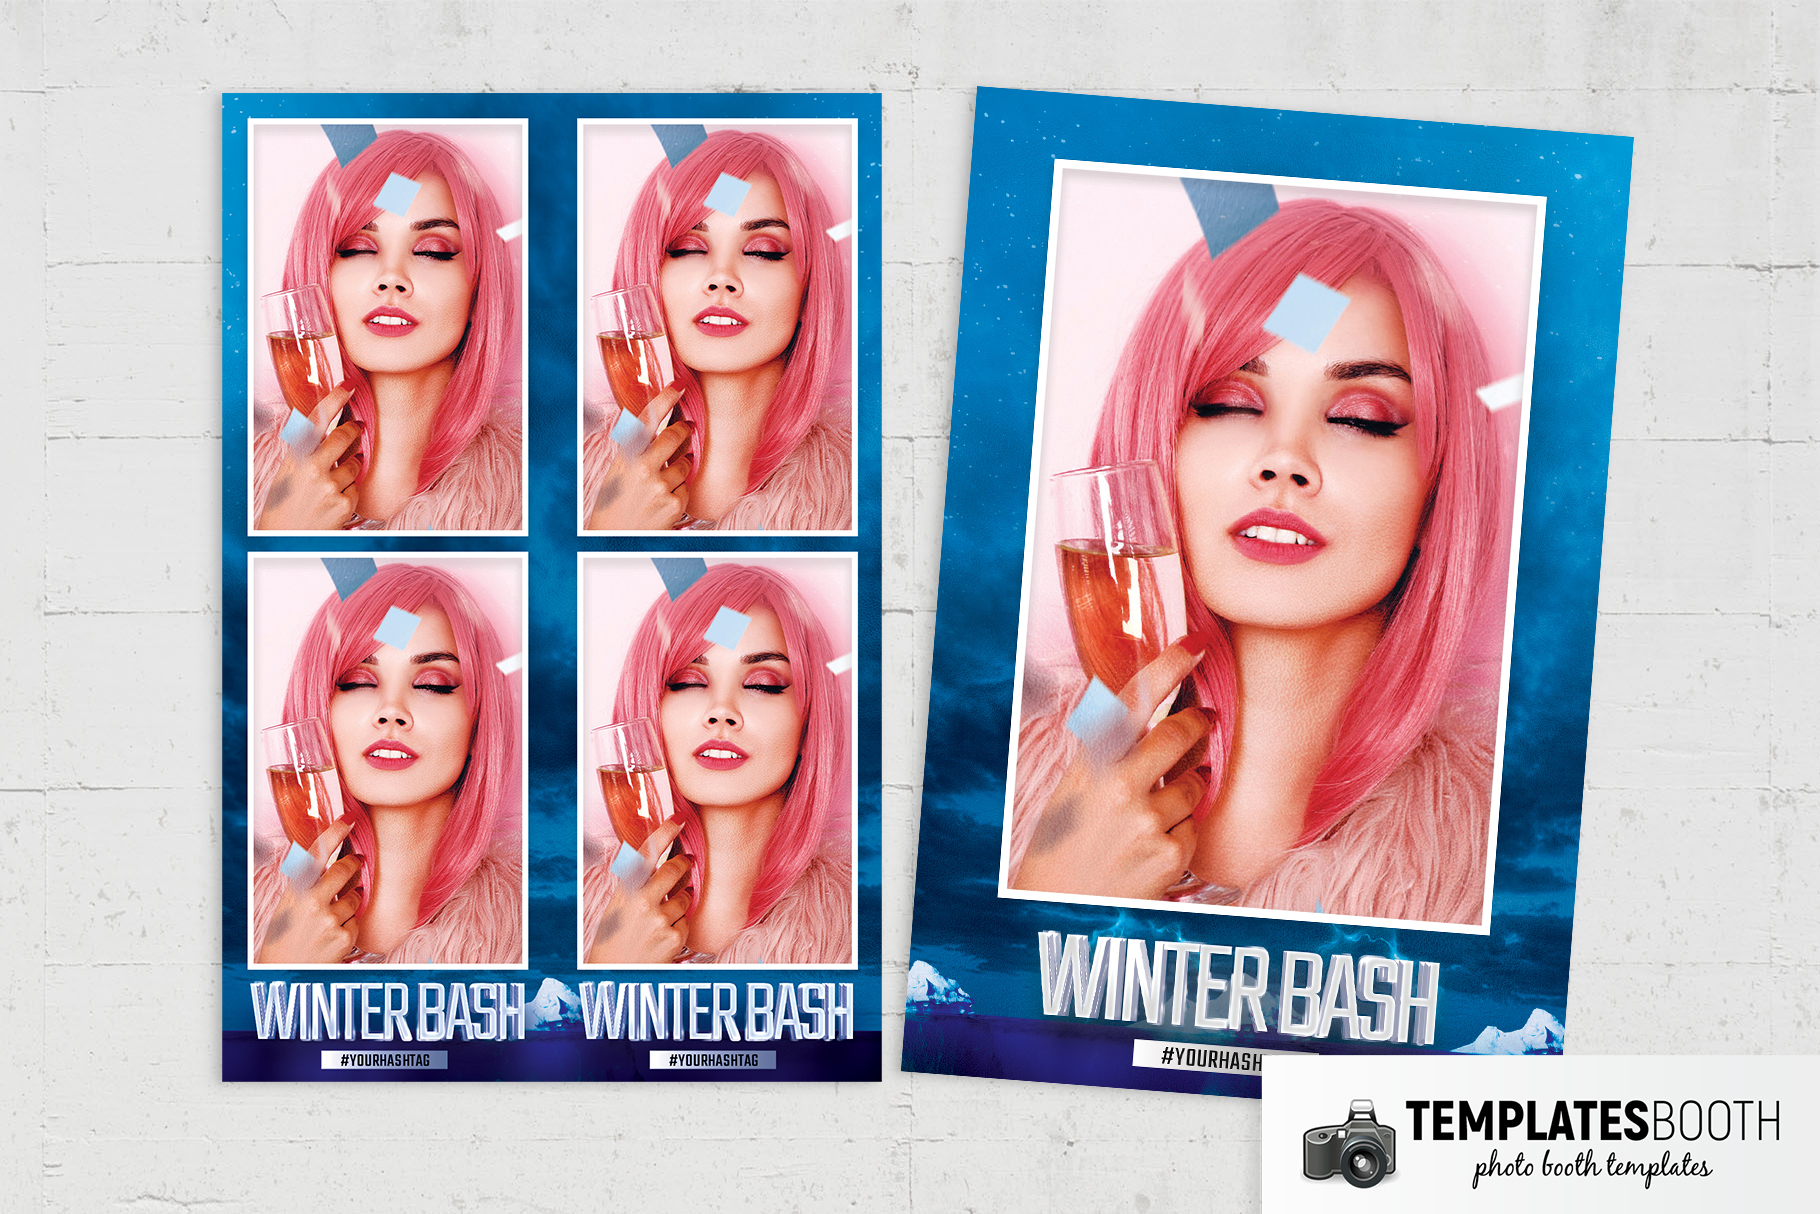 Winter Bash Photo Booth Template